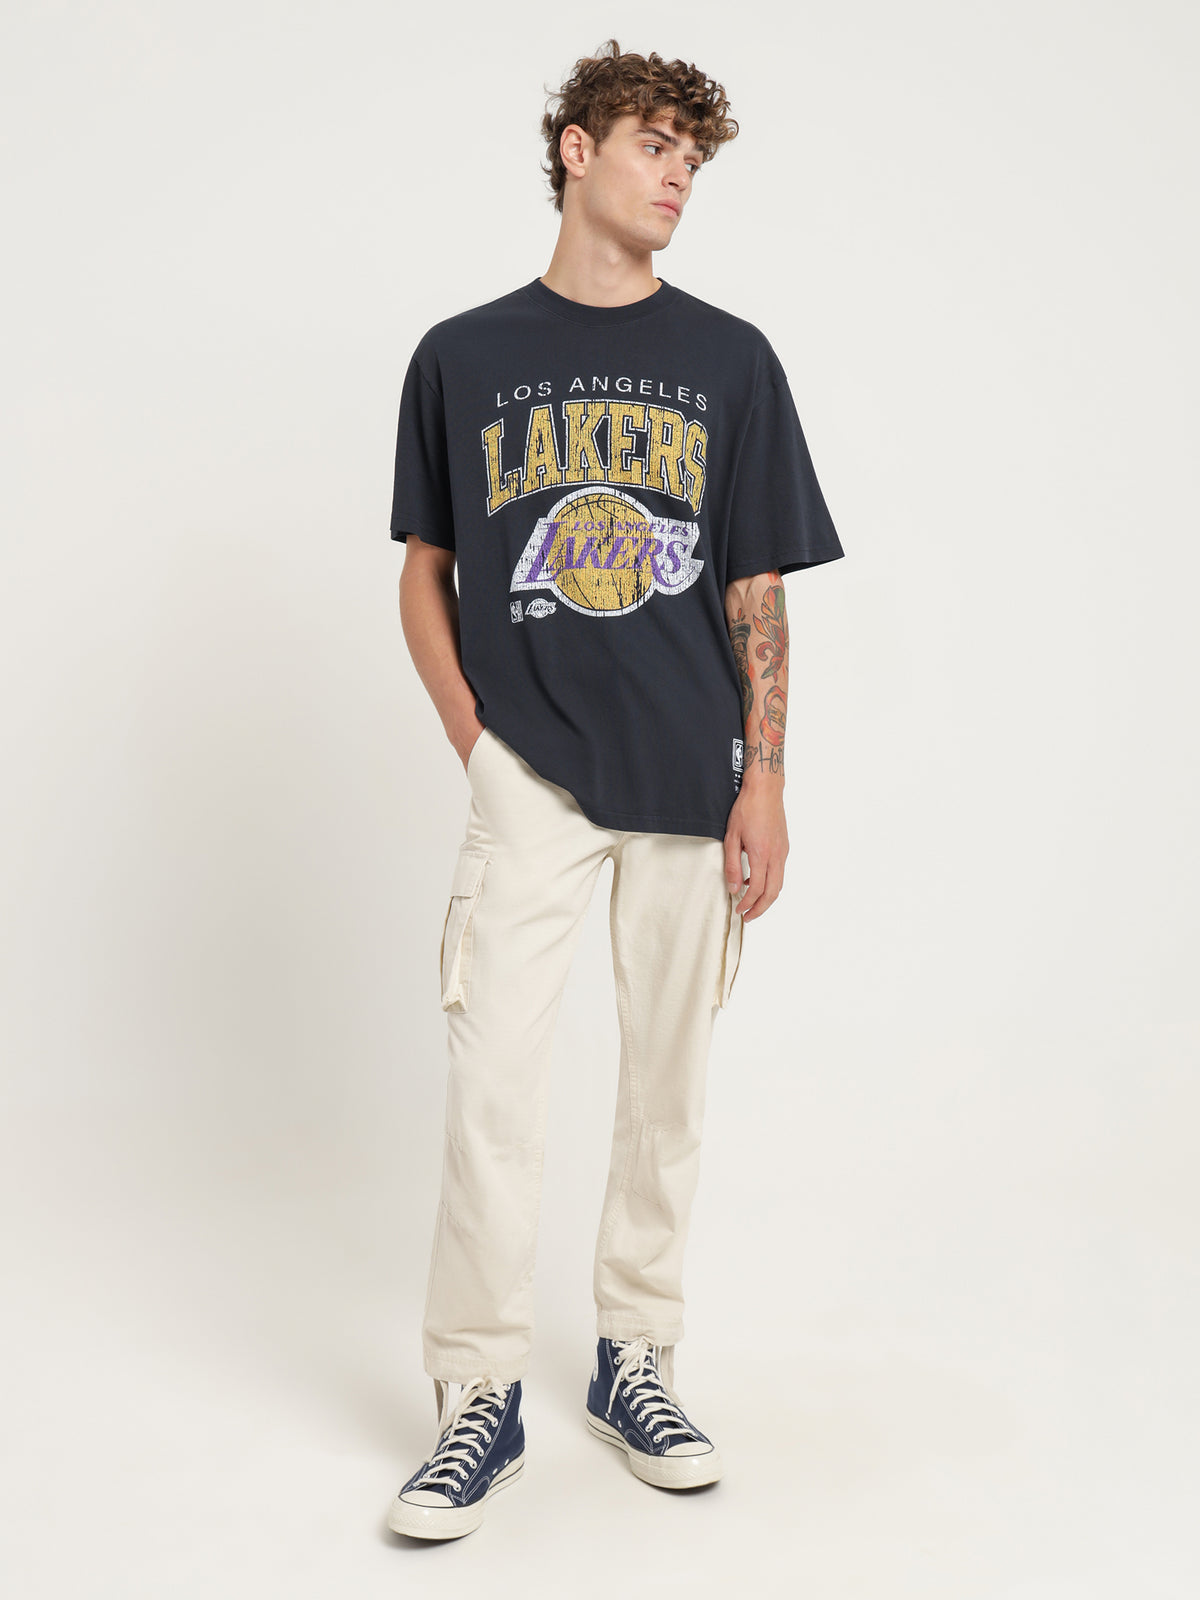 XL Arch Lakers T-Shirt in Faded Black